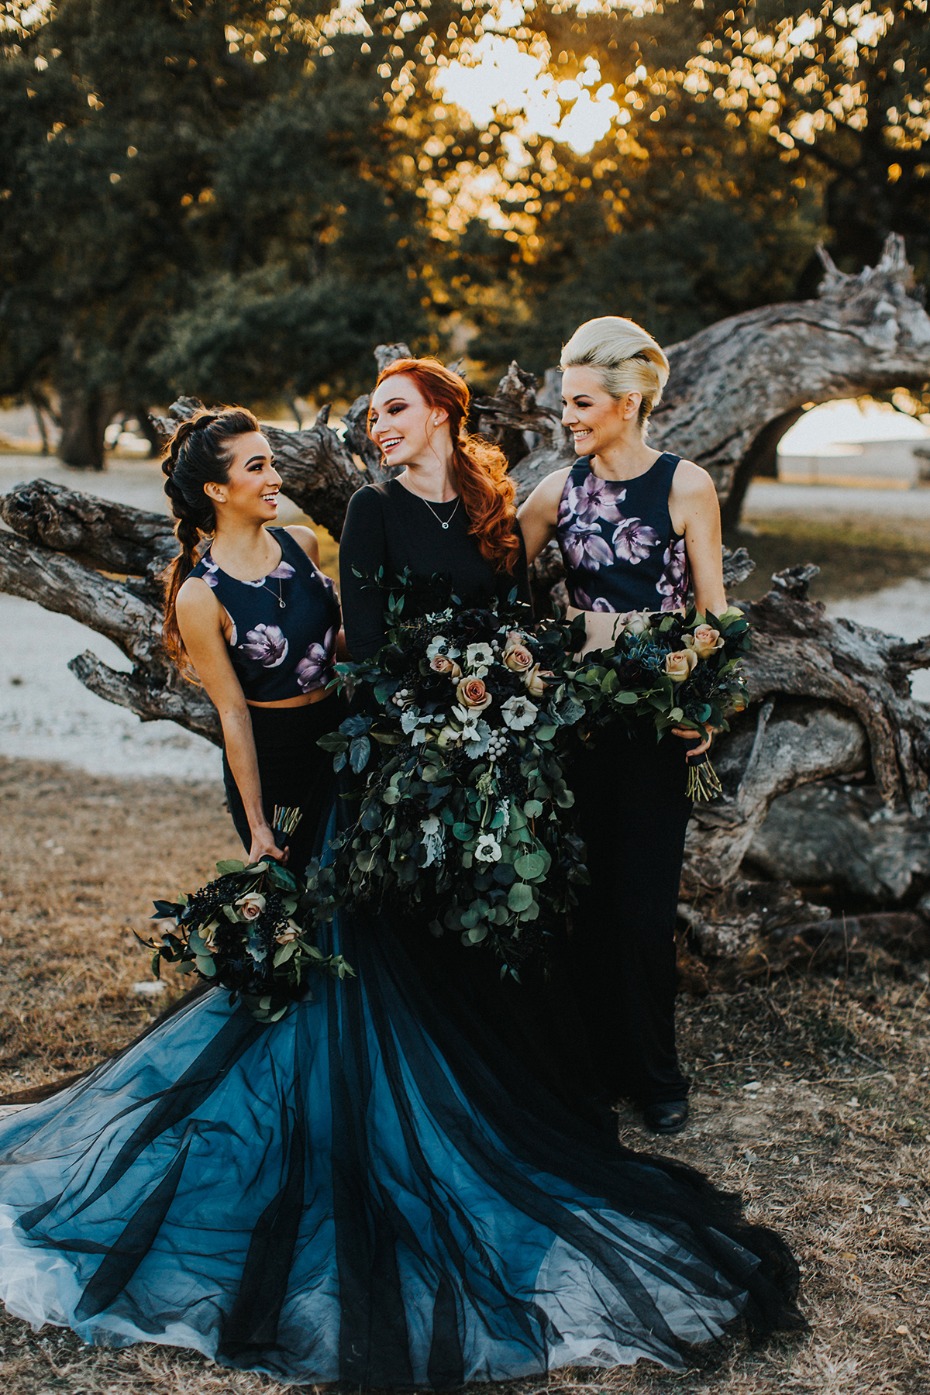 dramatic and dark themed wedding party